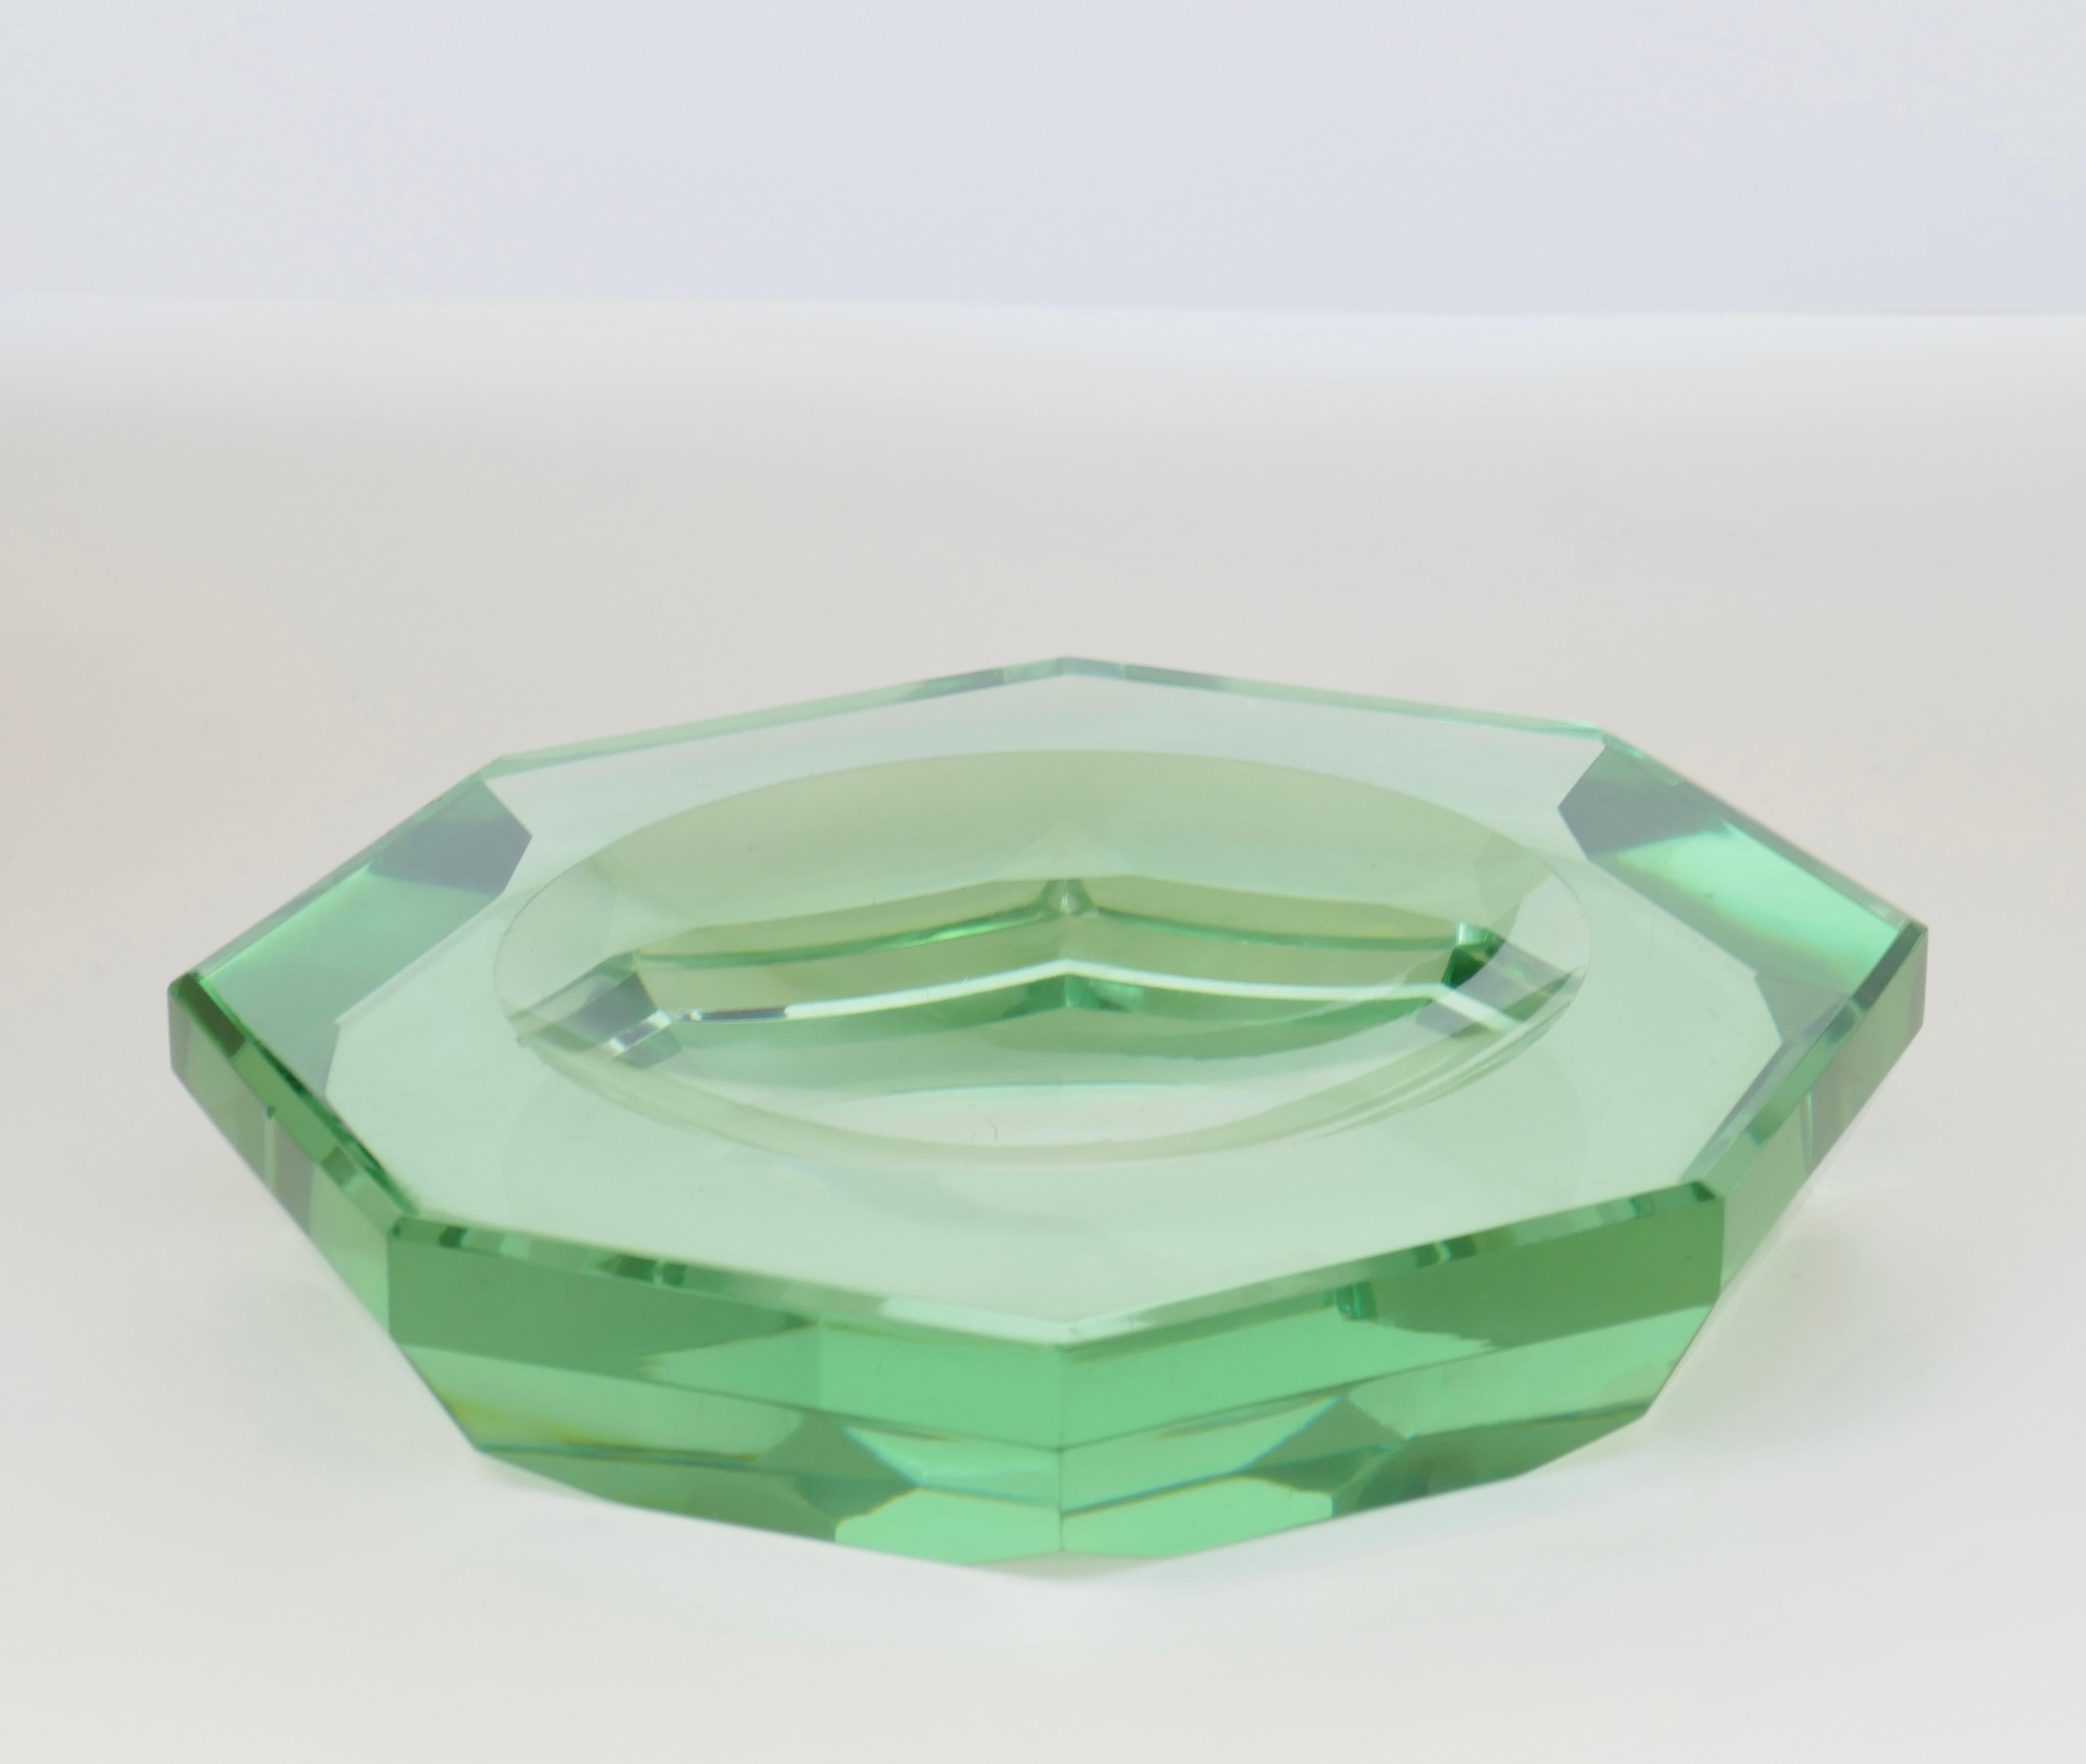 Mid-Century Modern Octagonal Green Centrepiece / Vide Poche by Fontana Arte, Italy, 1950s For Sale